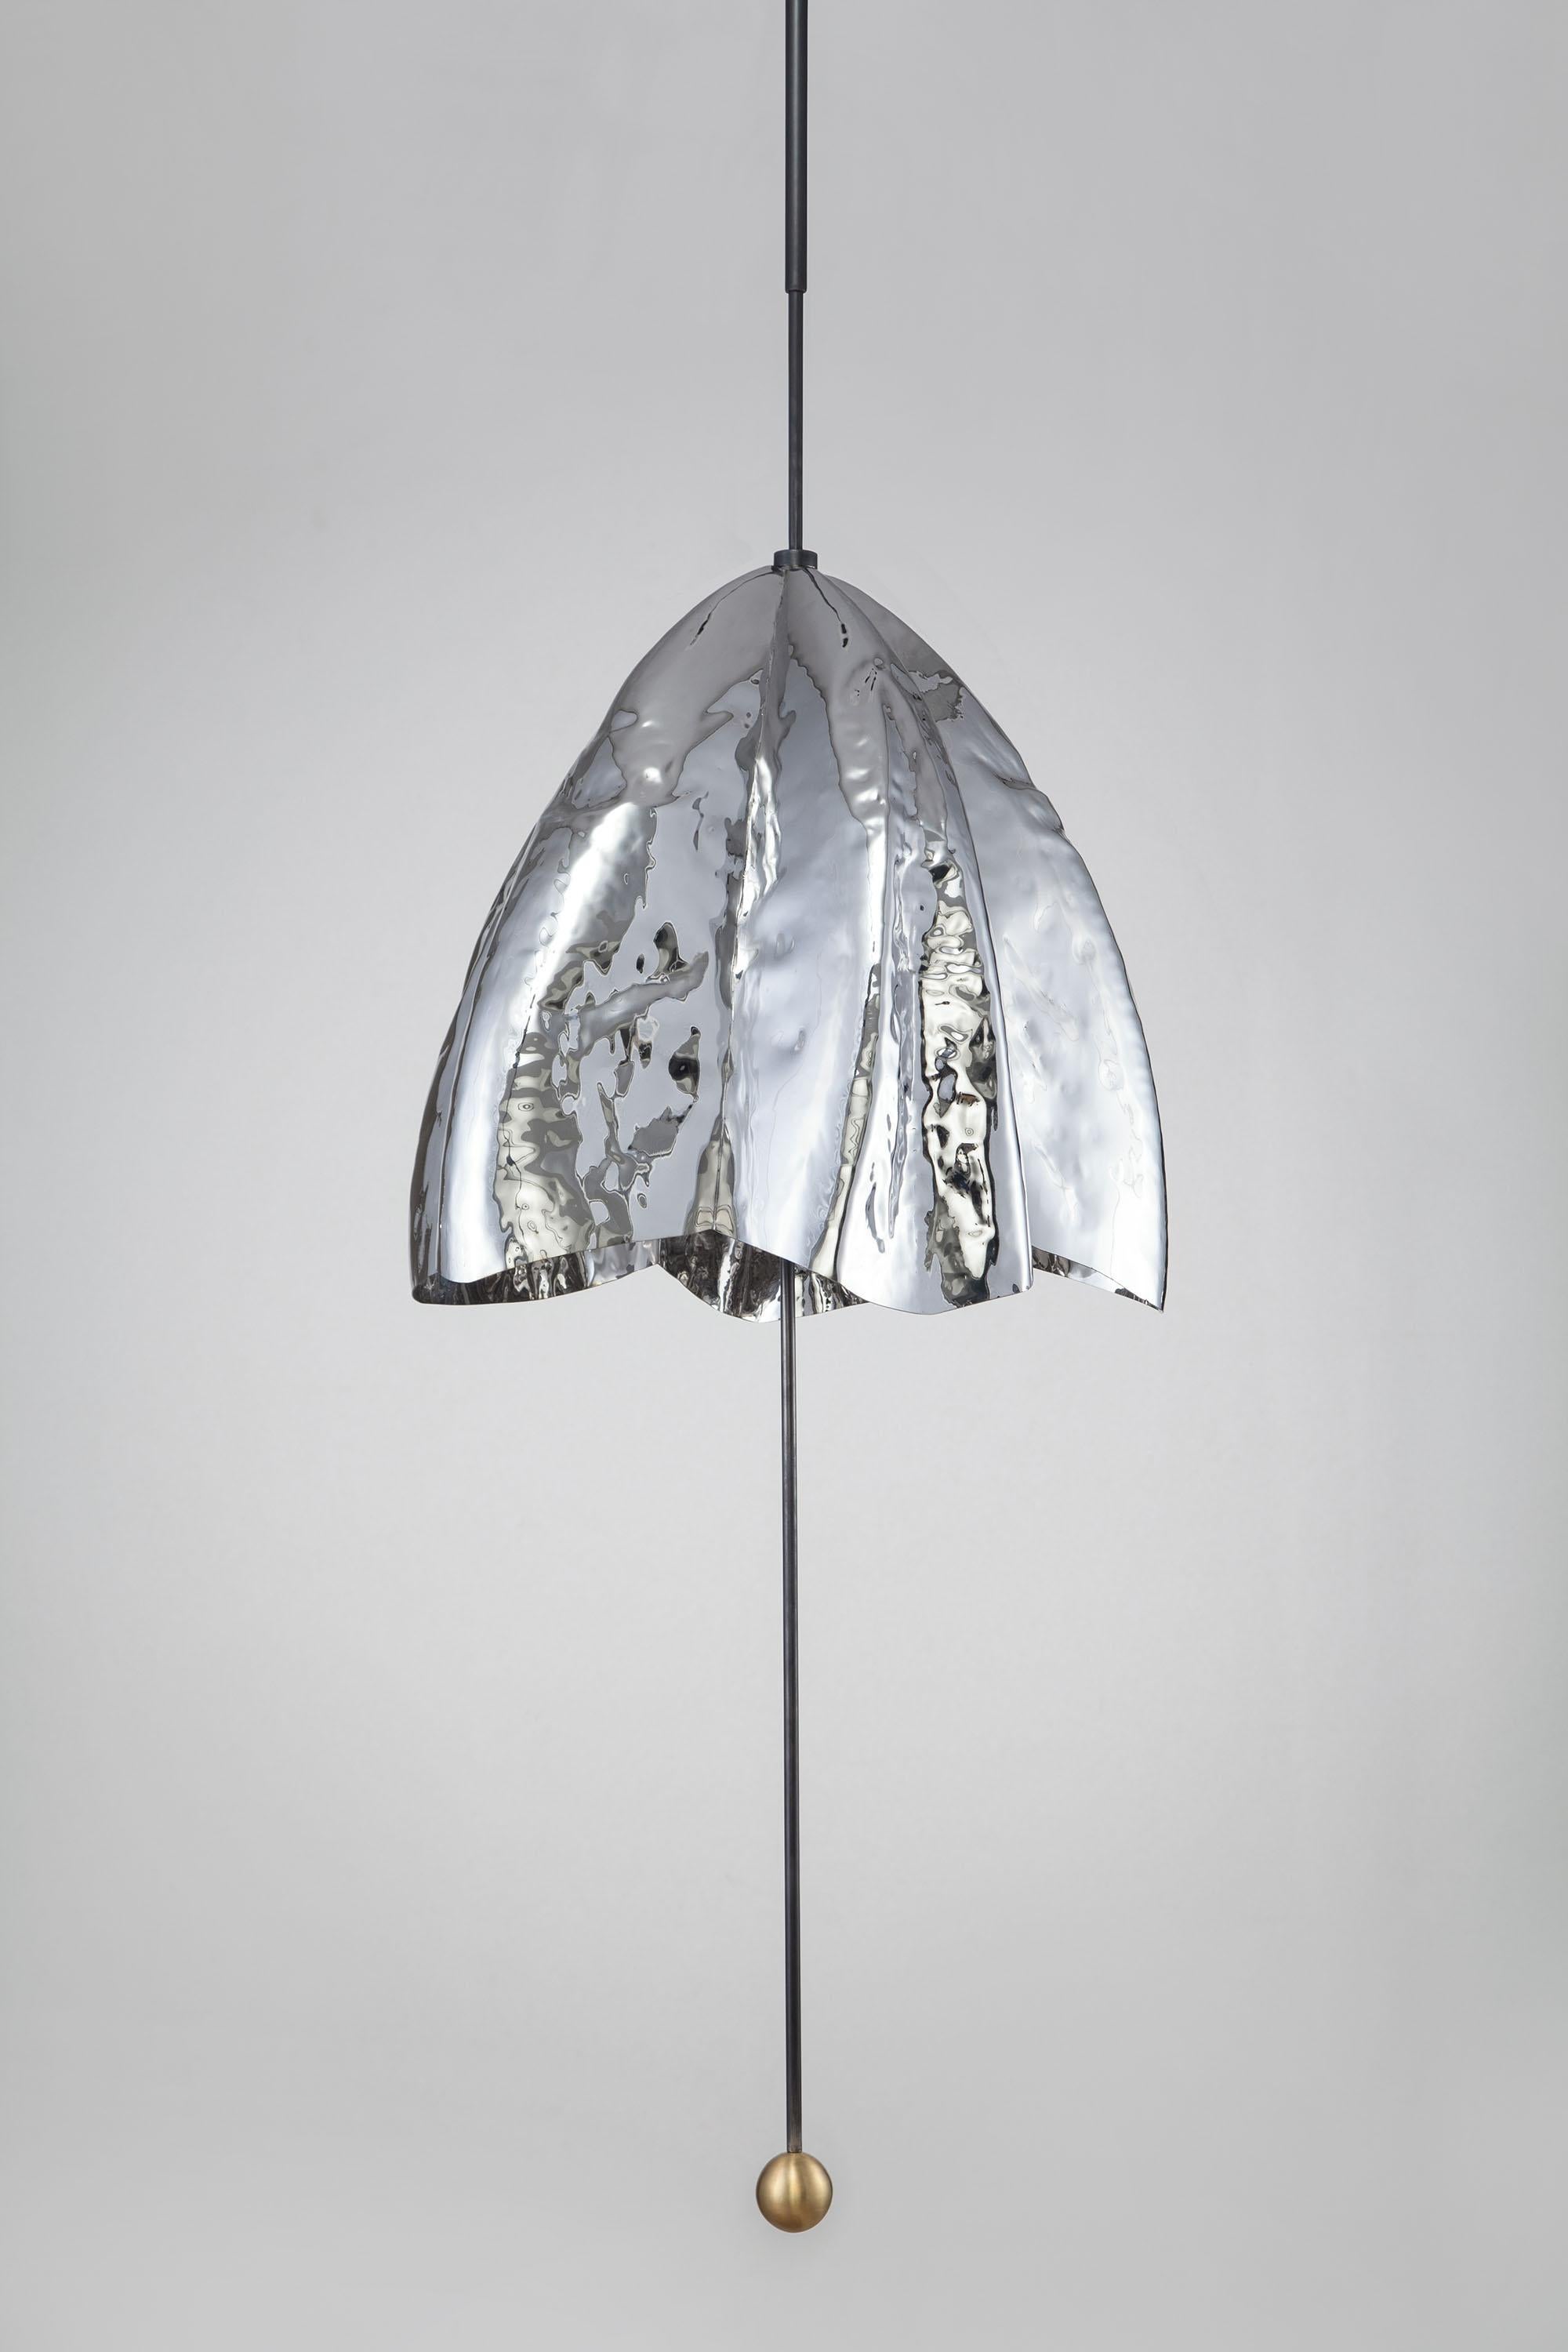 Contemporary Mirror Polished Steel & Brass Pendant, Overlay I by Paul Matter

Started with the idea of drafting a pattern on paper for a garment with free
flowing 3-D folds and arresting these fabric folds in metal, Kallol Datta, created a series of